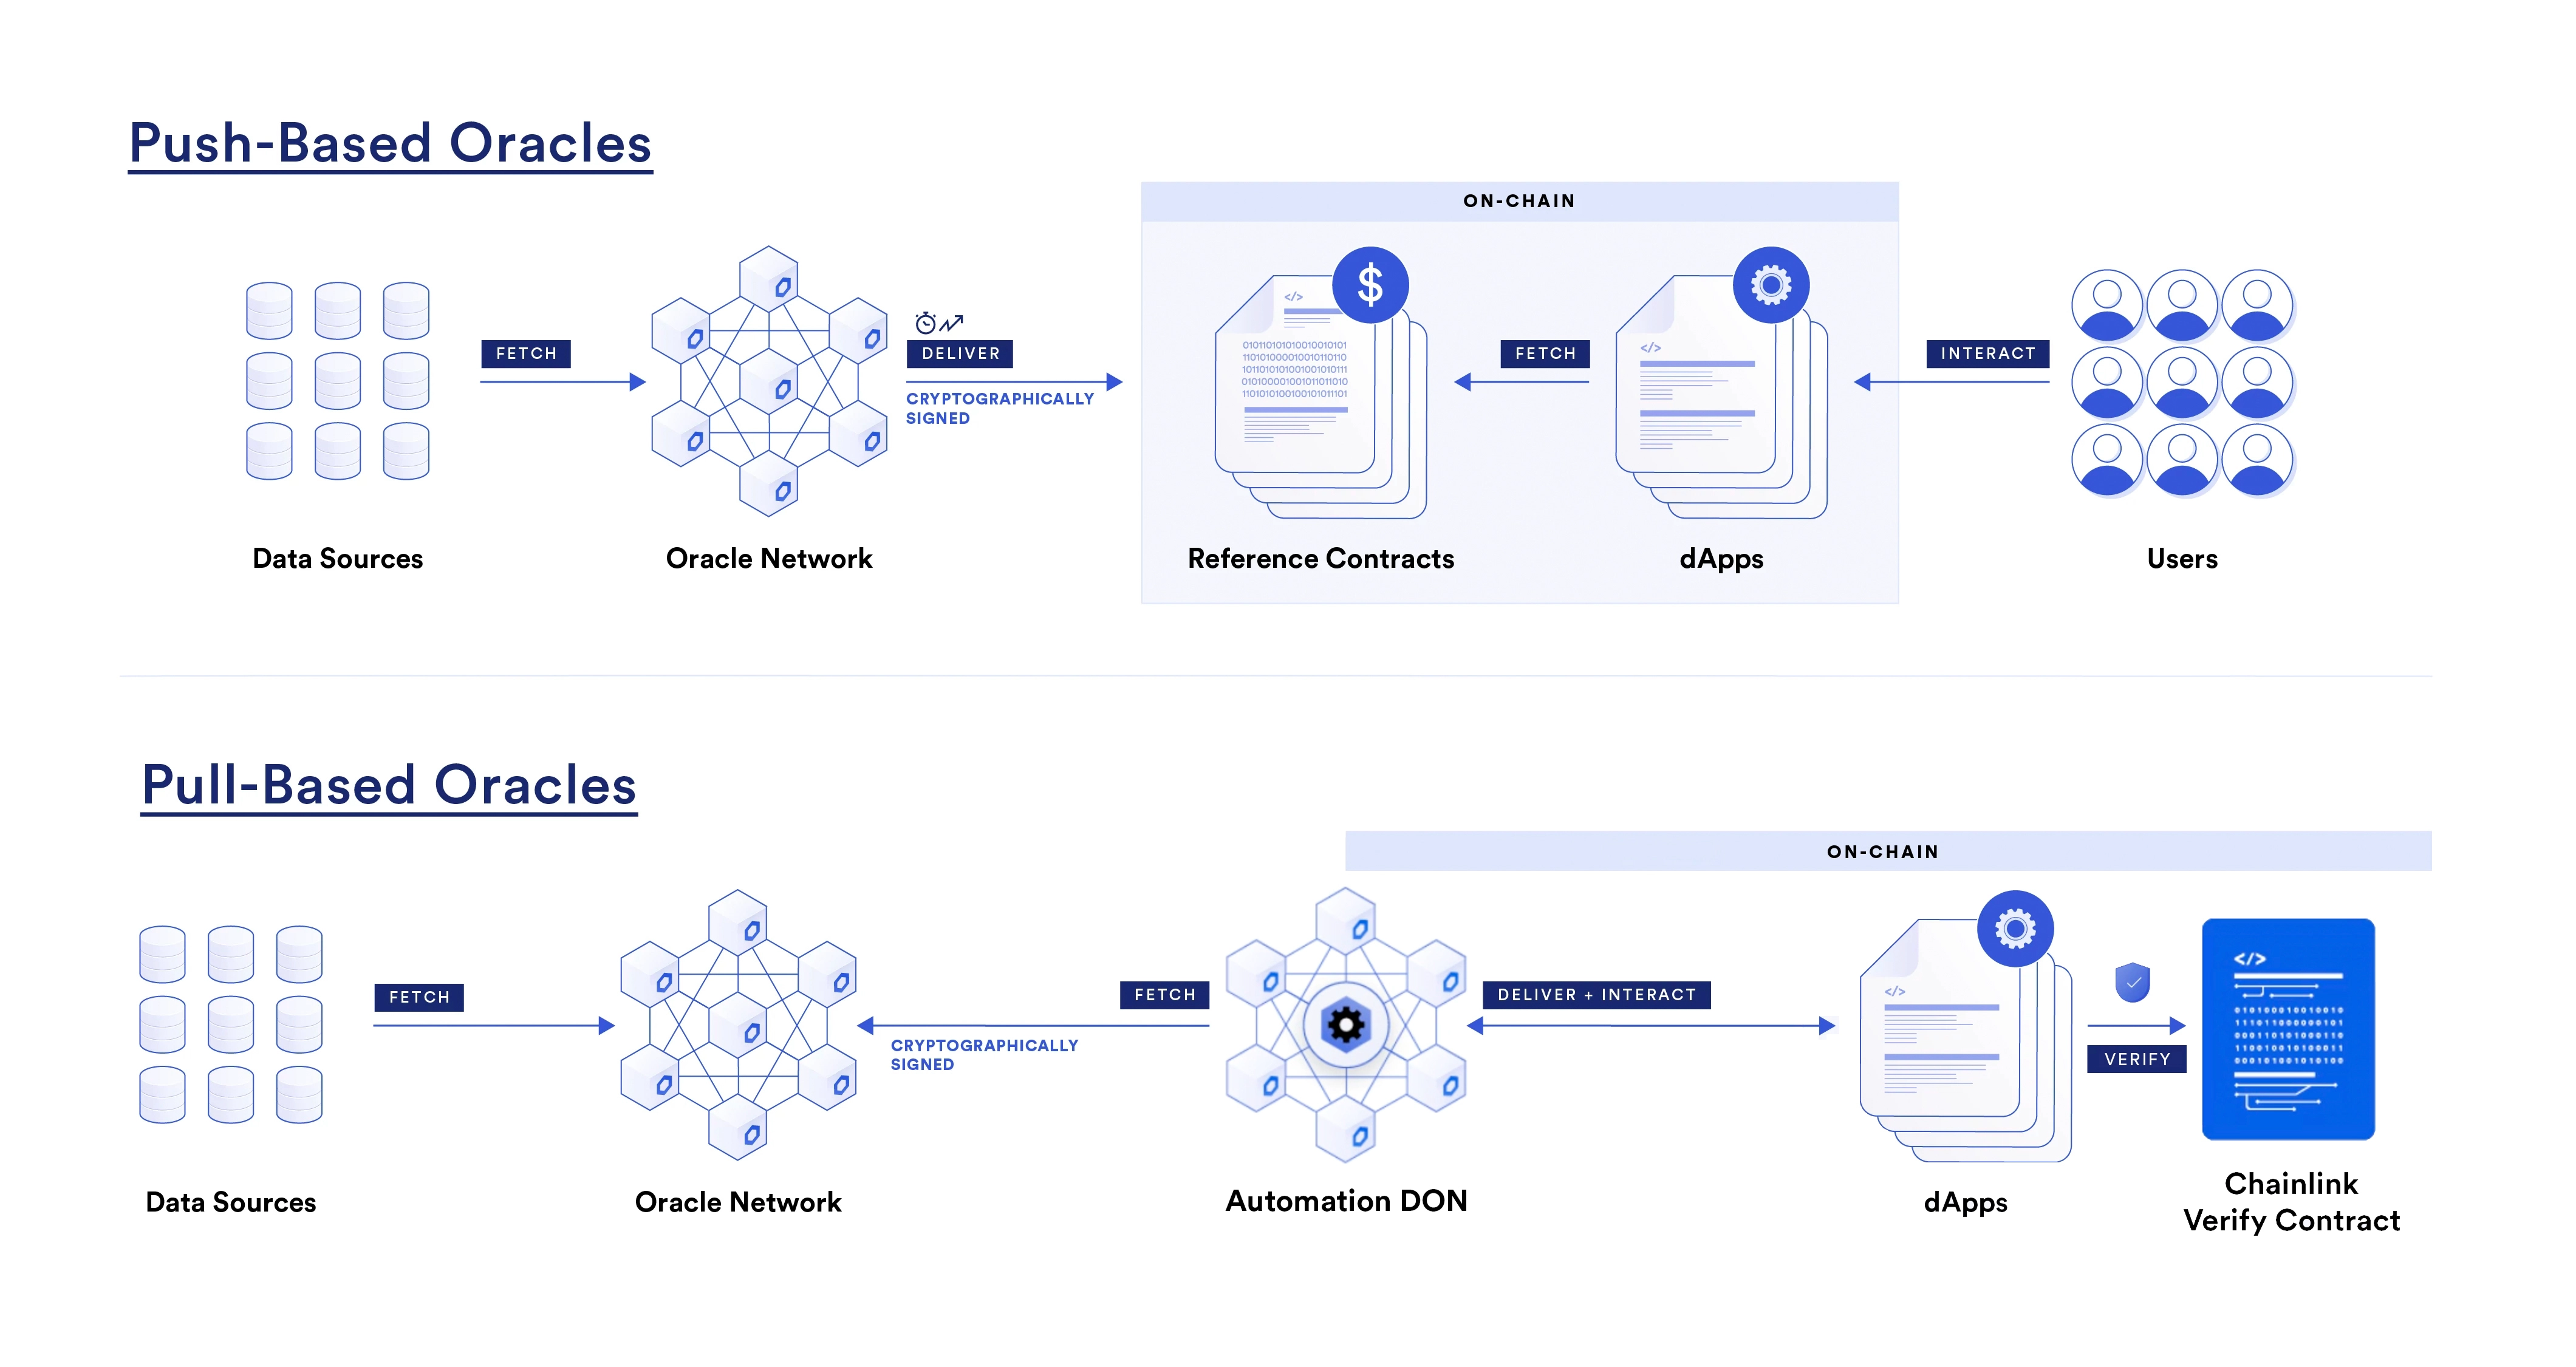 Chainlink Data Streams - Push-Based vs Pull-Based Oracles